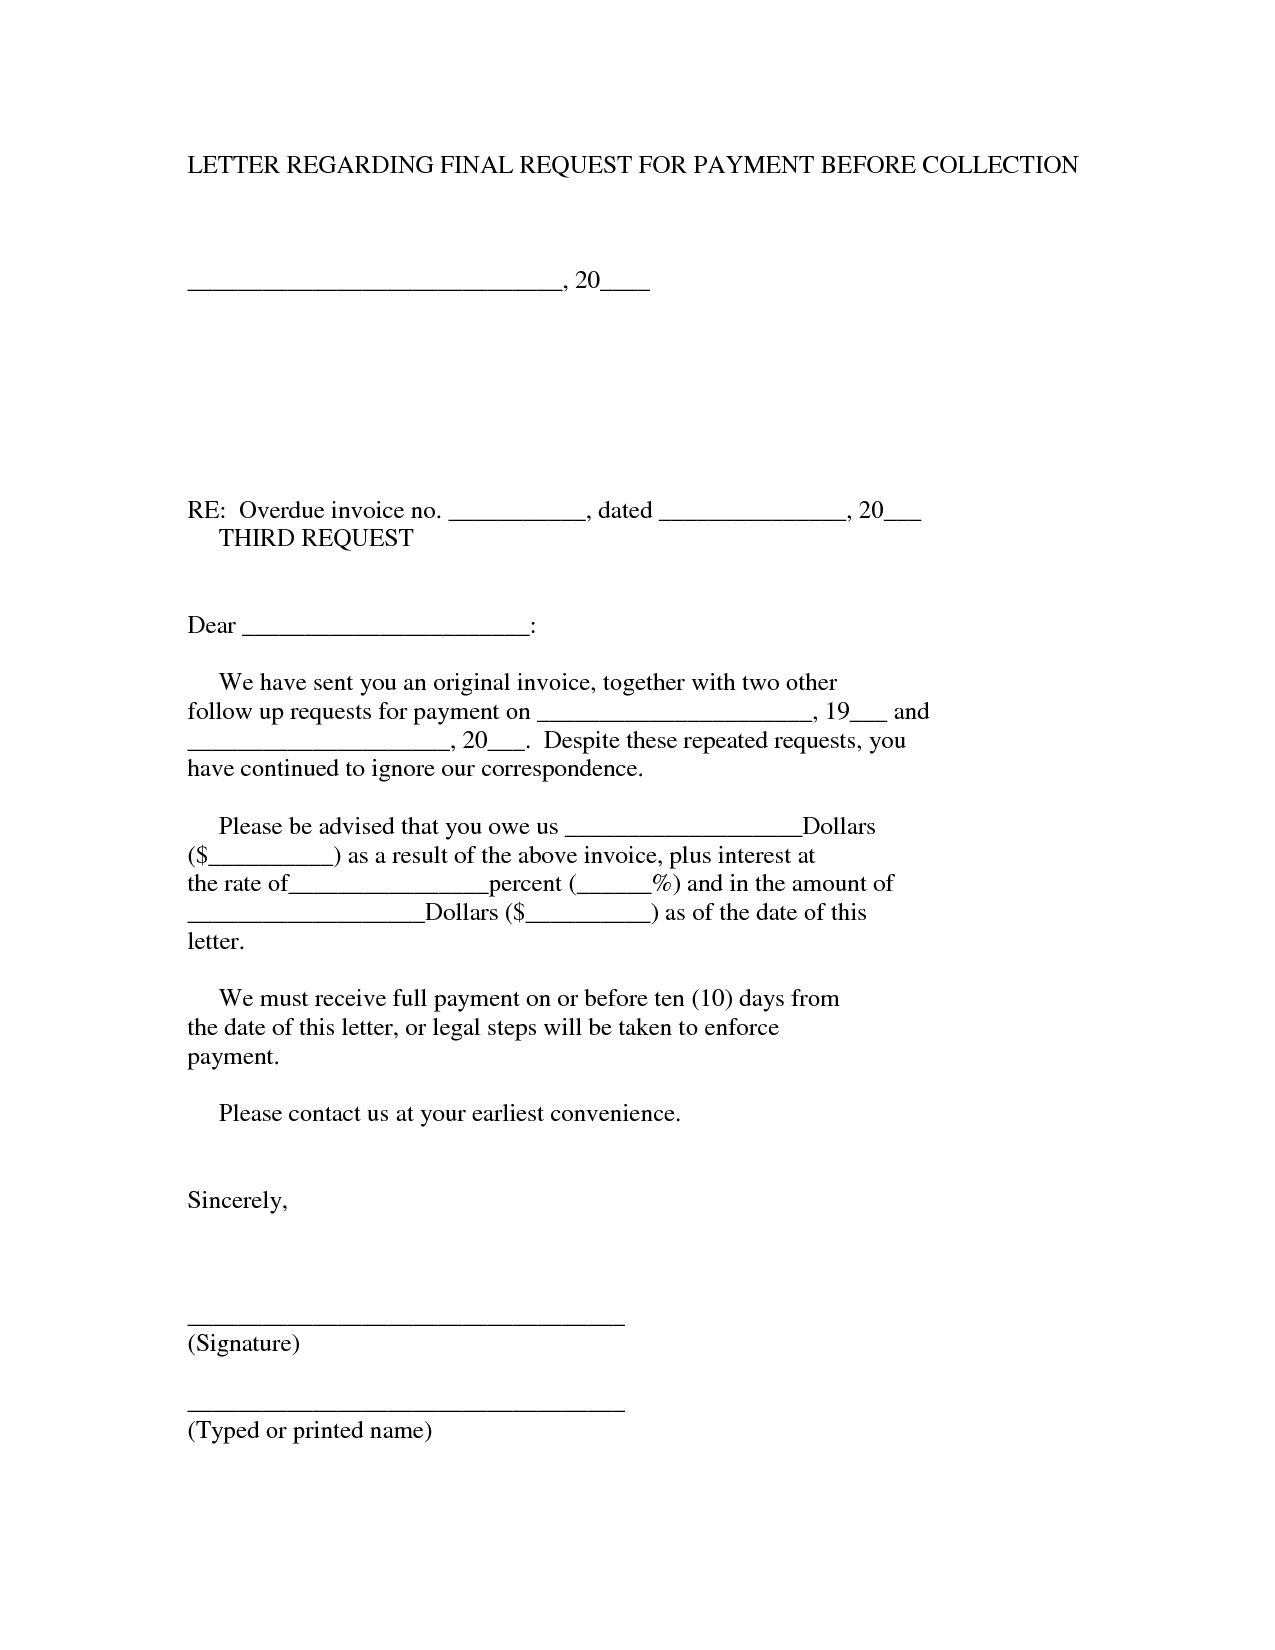 17 best photos of final payment letter final payment demand request for invoice template